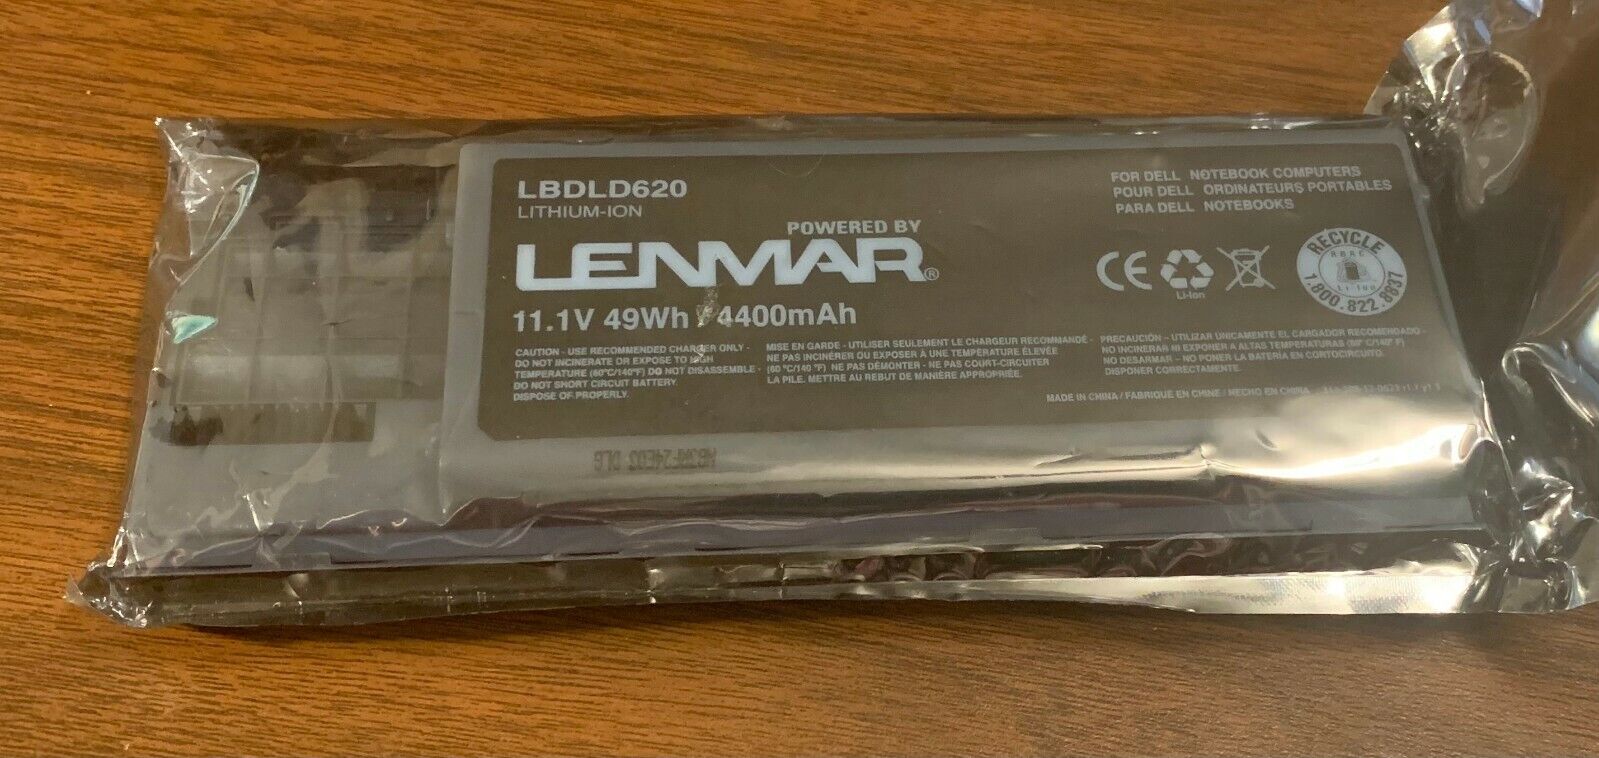 Lenmar Battery for Dell Laptop Computers - style LBDLD620 - new old stock